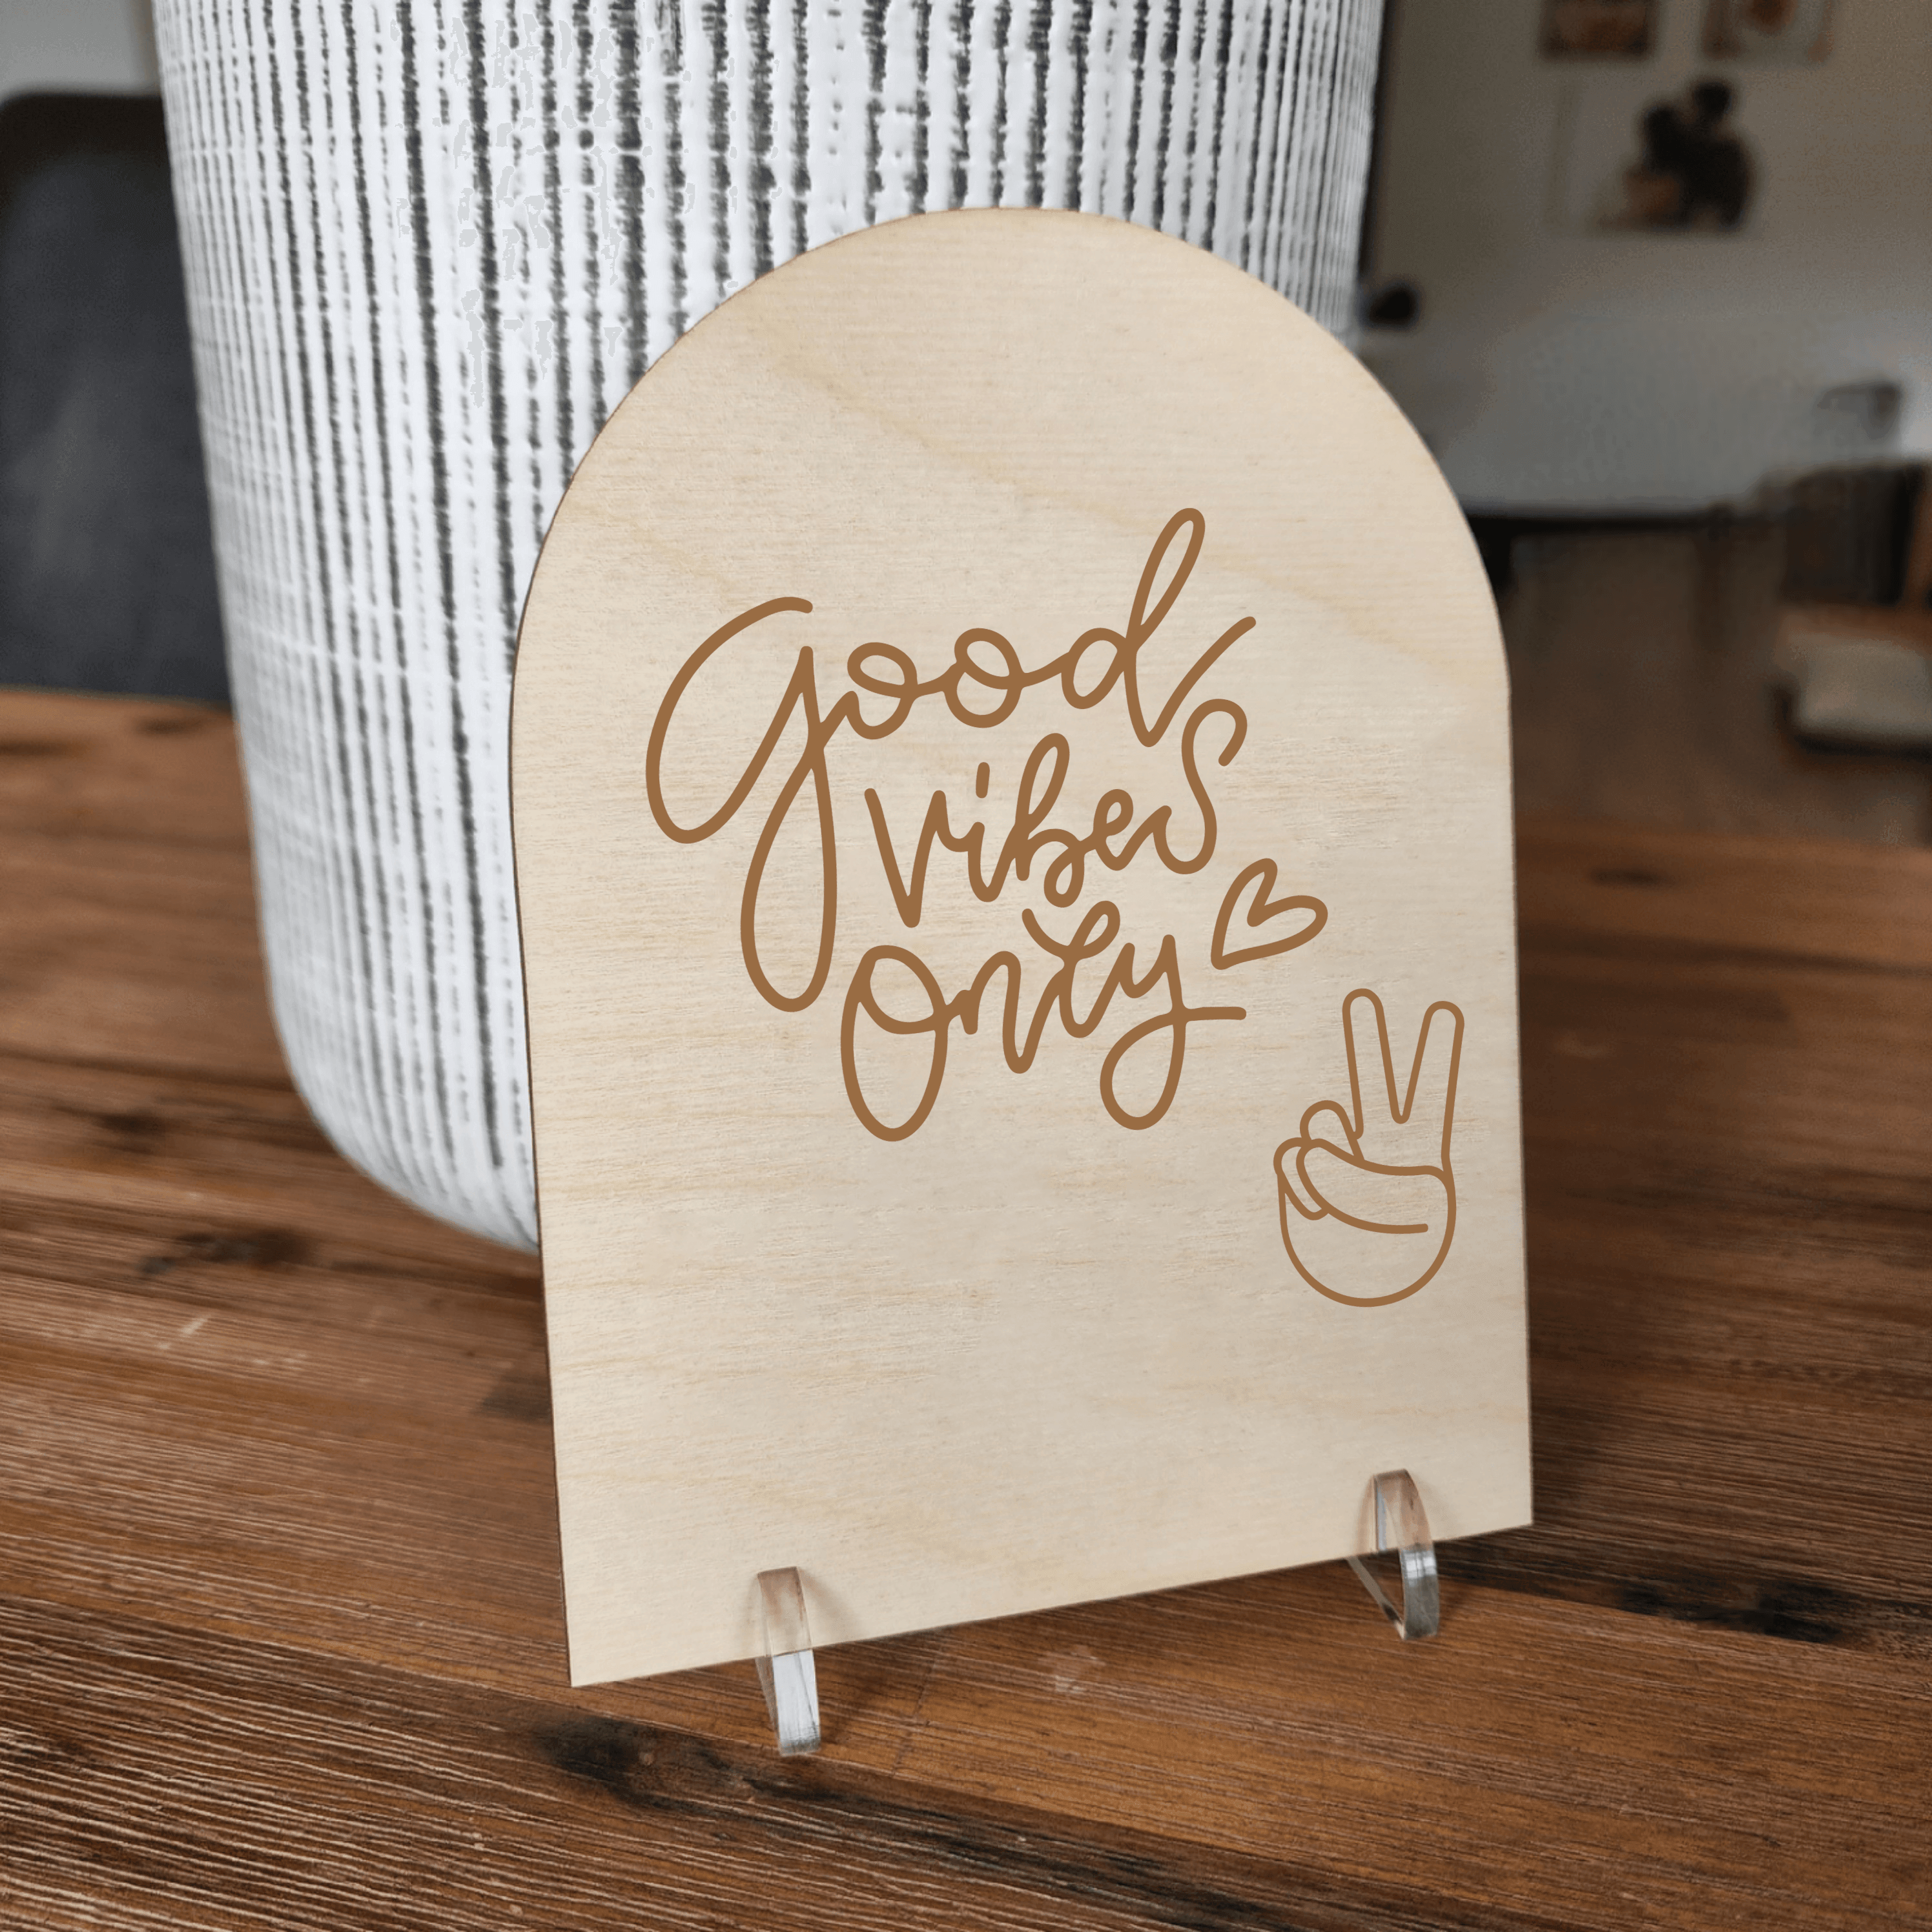 Wooden Arch Quote - Good Vibes Only ✌️ - The Willow Corner